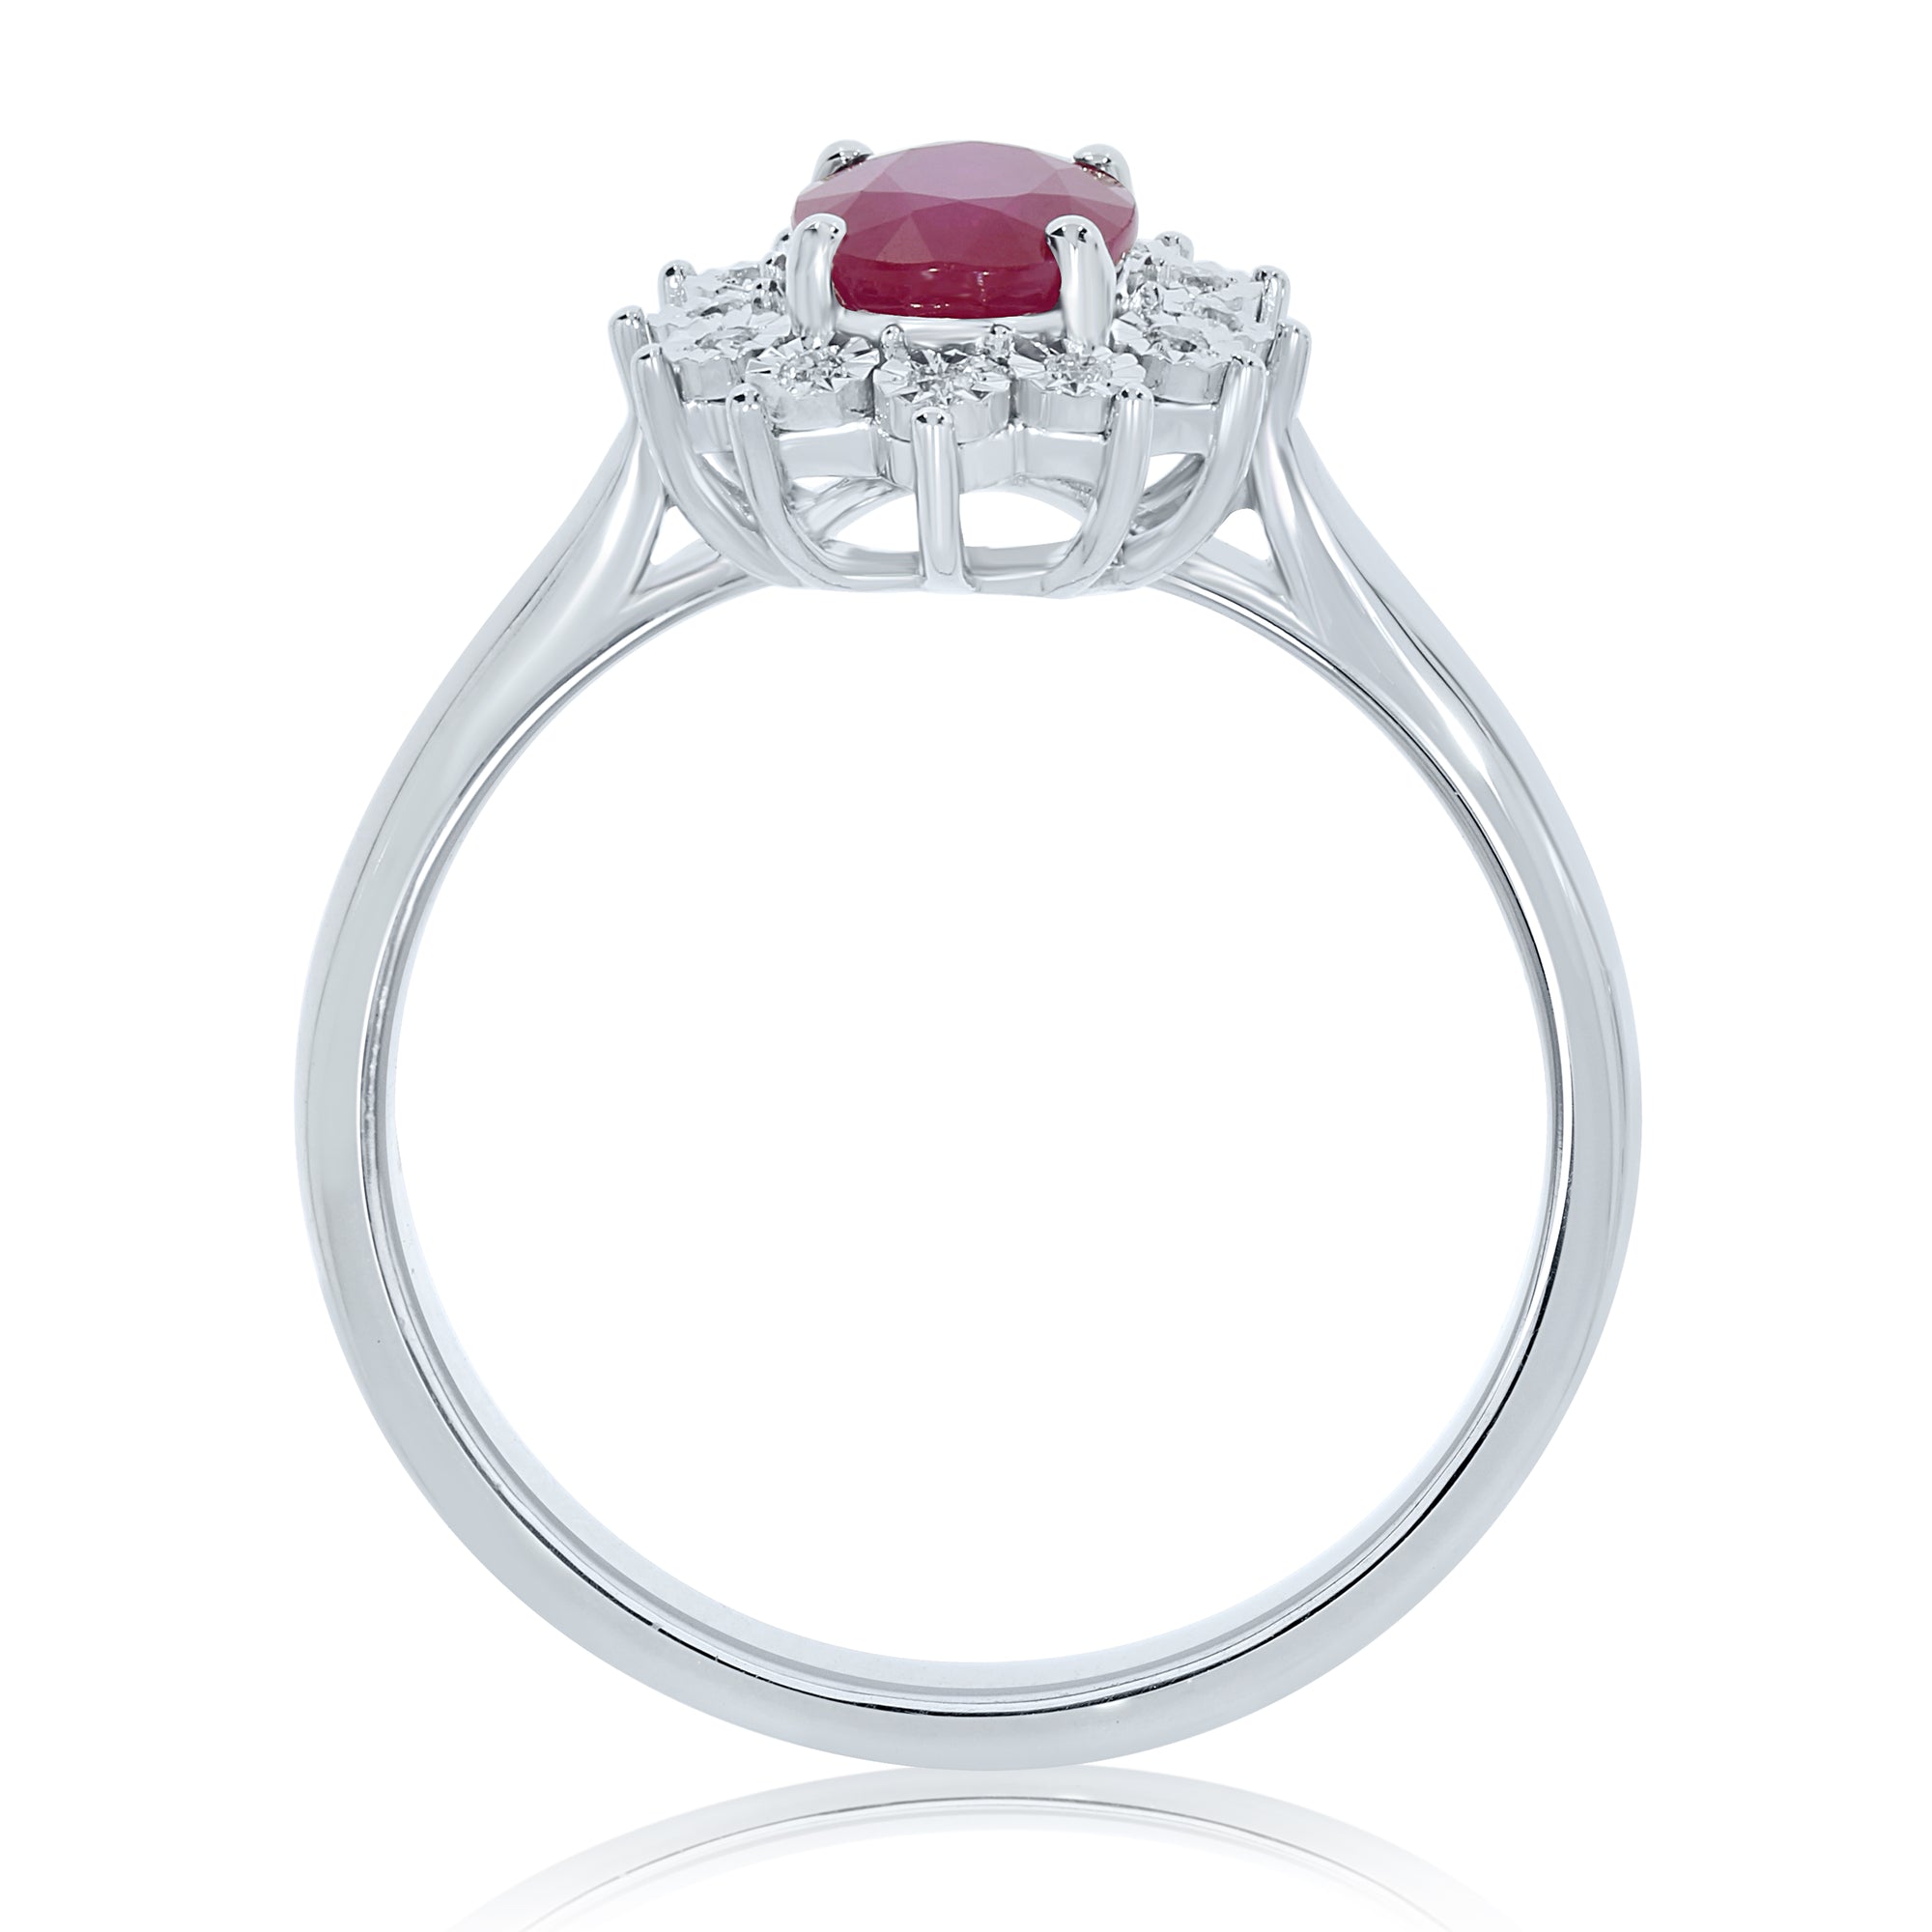 9ct white gold 7x5mm oval ruby & miracle plate diamond cluster ring 0.04ct